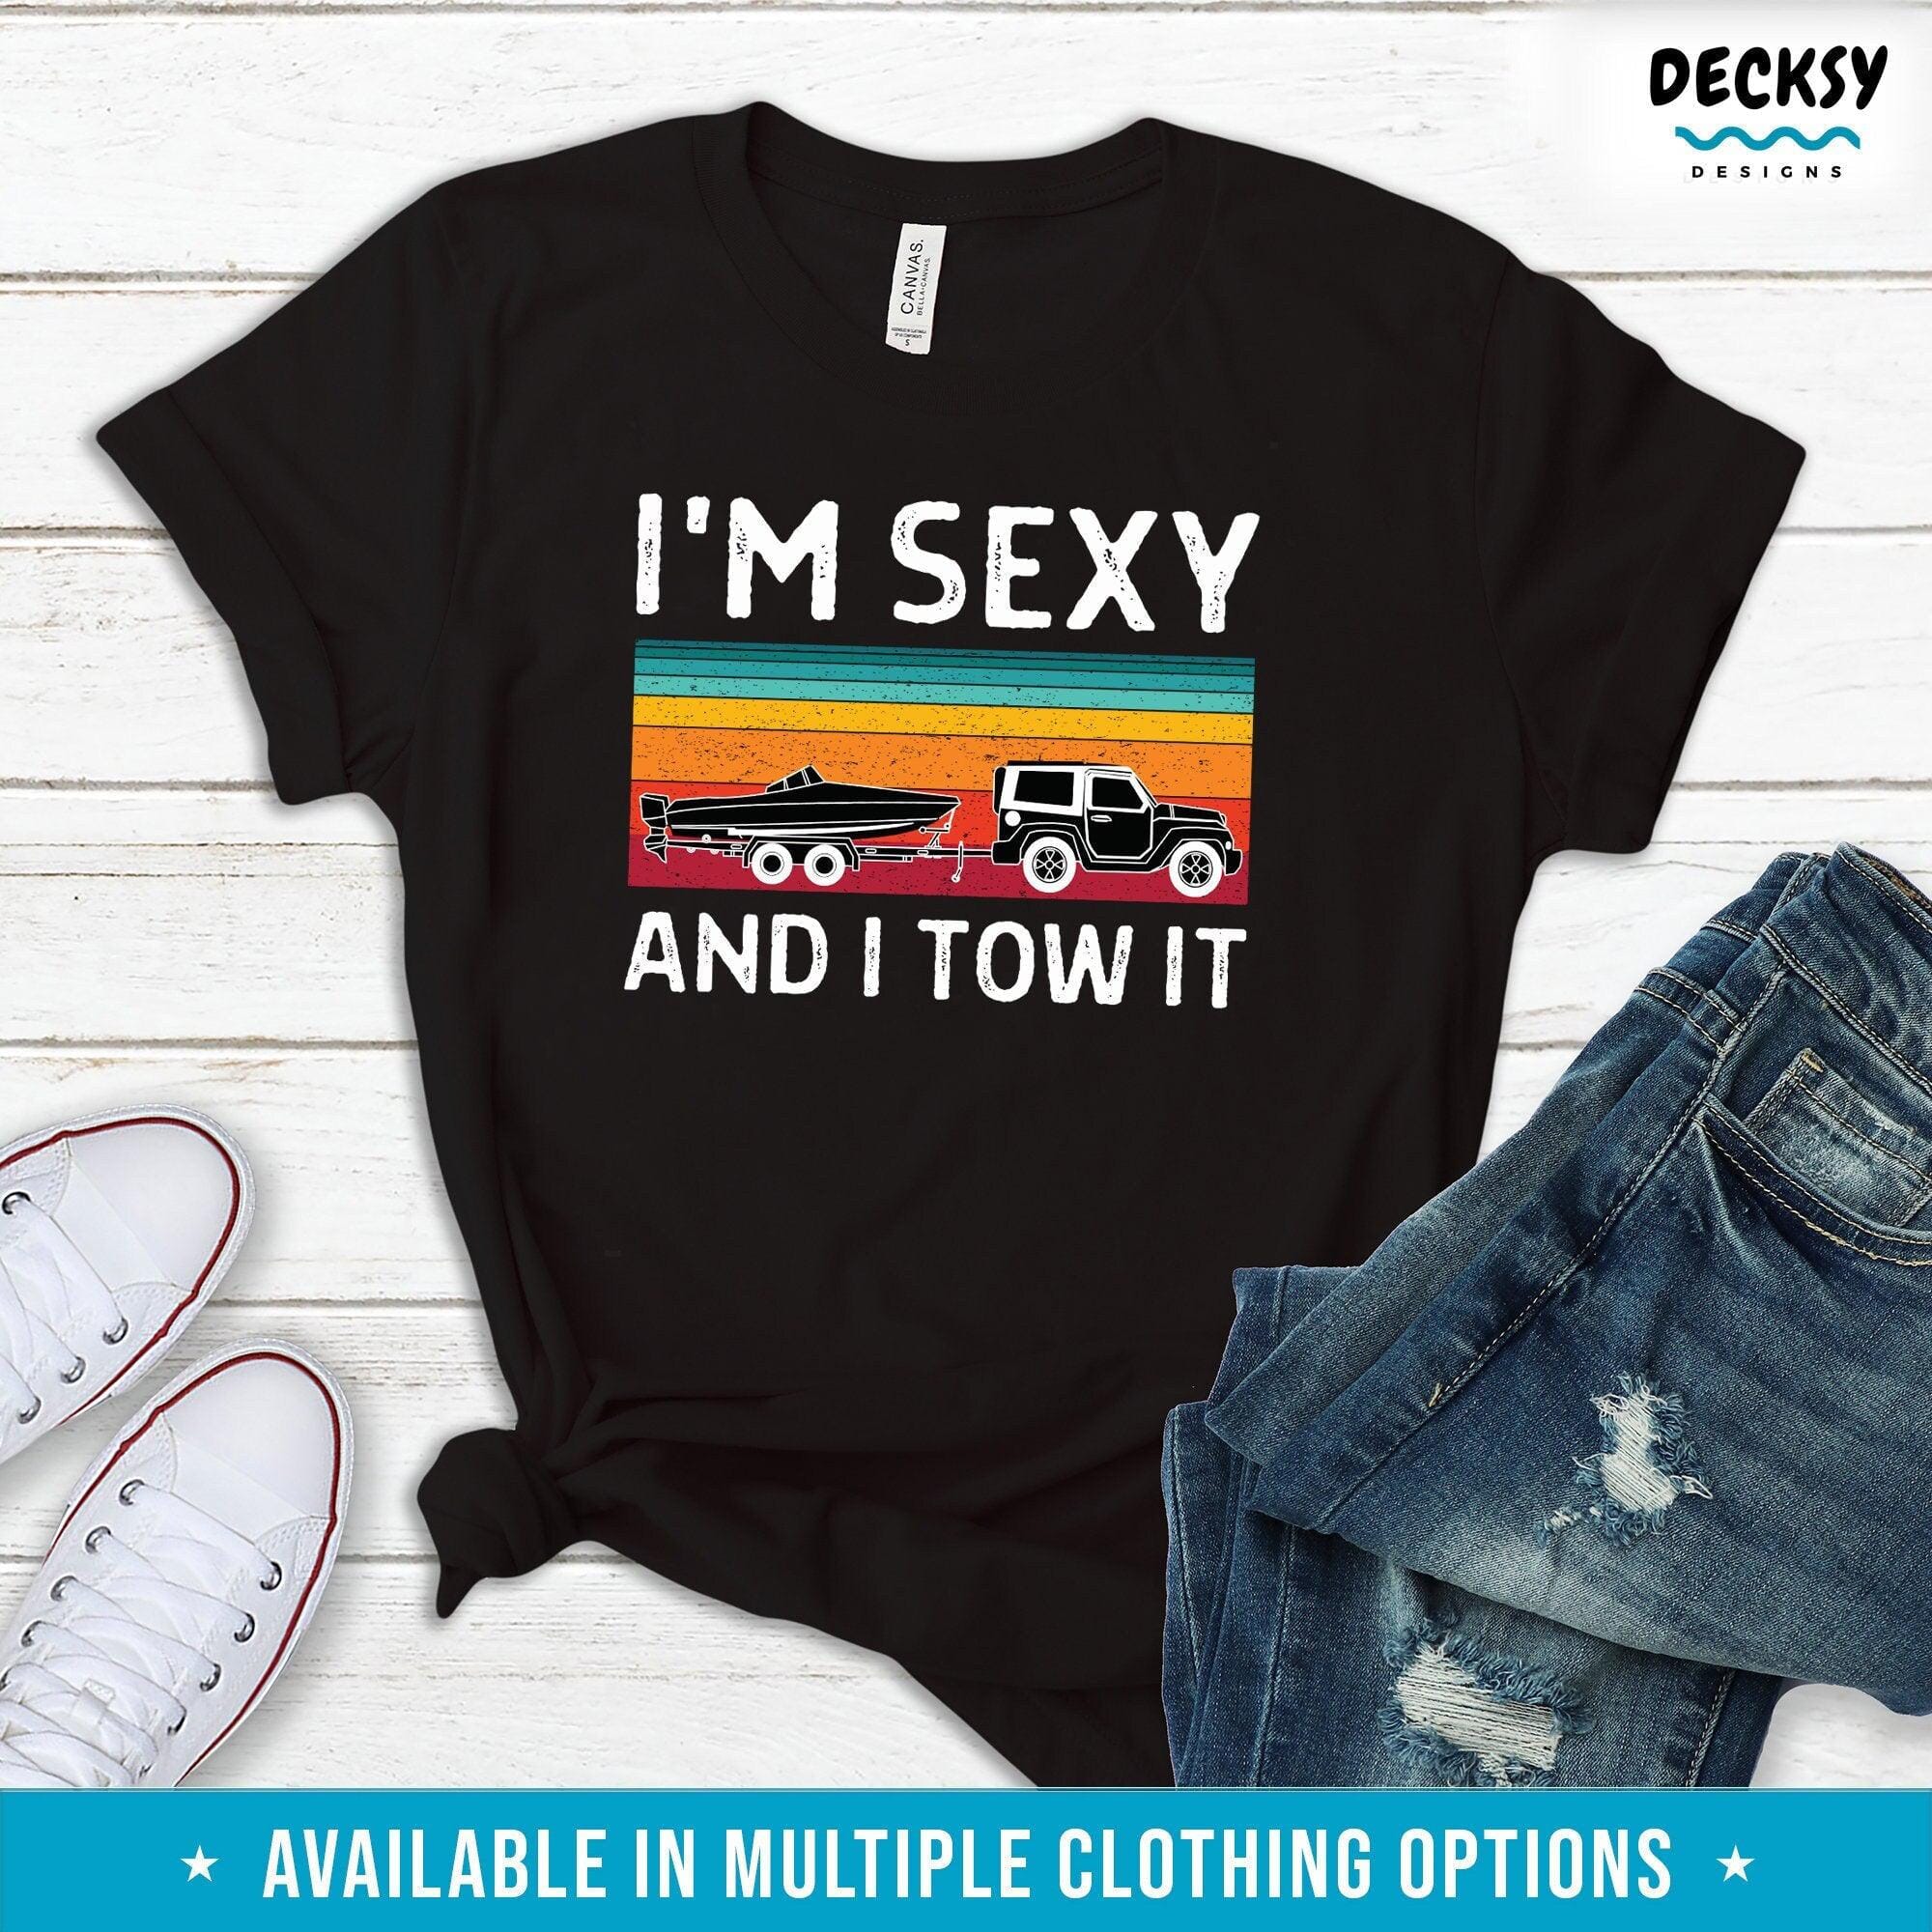 Funny Boating Shirt, Gift For Boat Owner-Clothing:Gender-Neutral Adult Clothing:Tops & Tees:T-shirts:Graphic Tees-DecksyDesigns